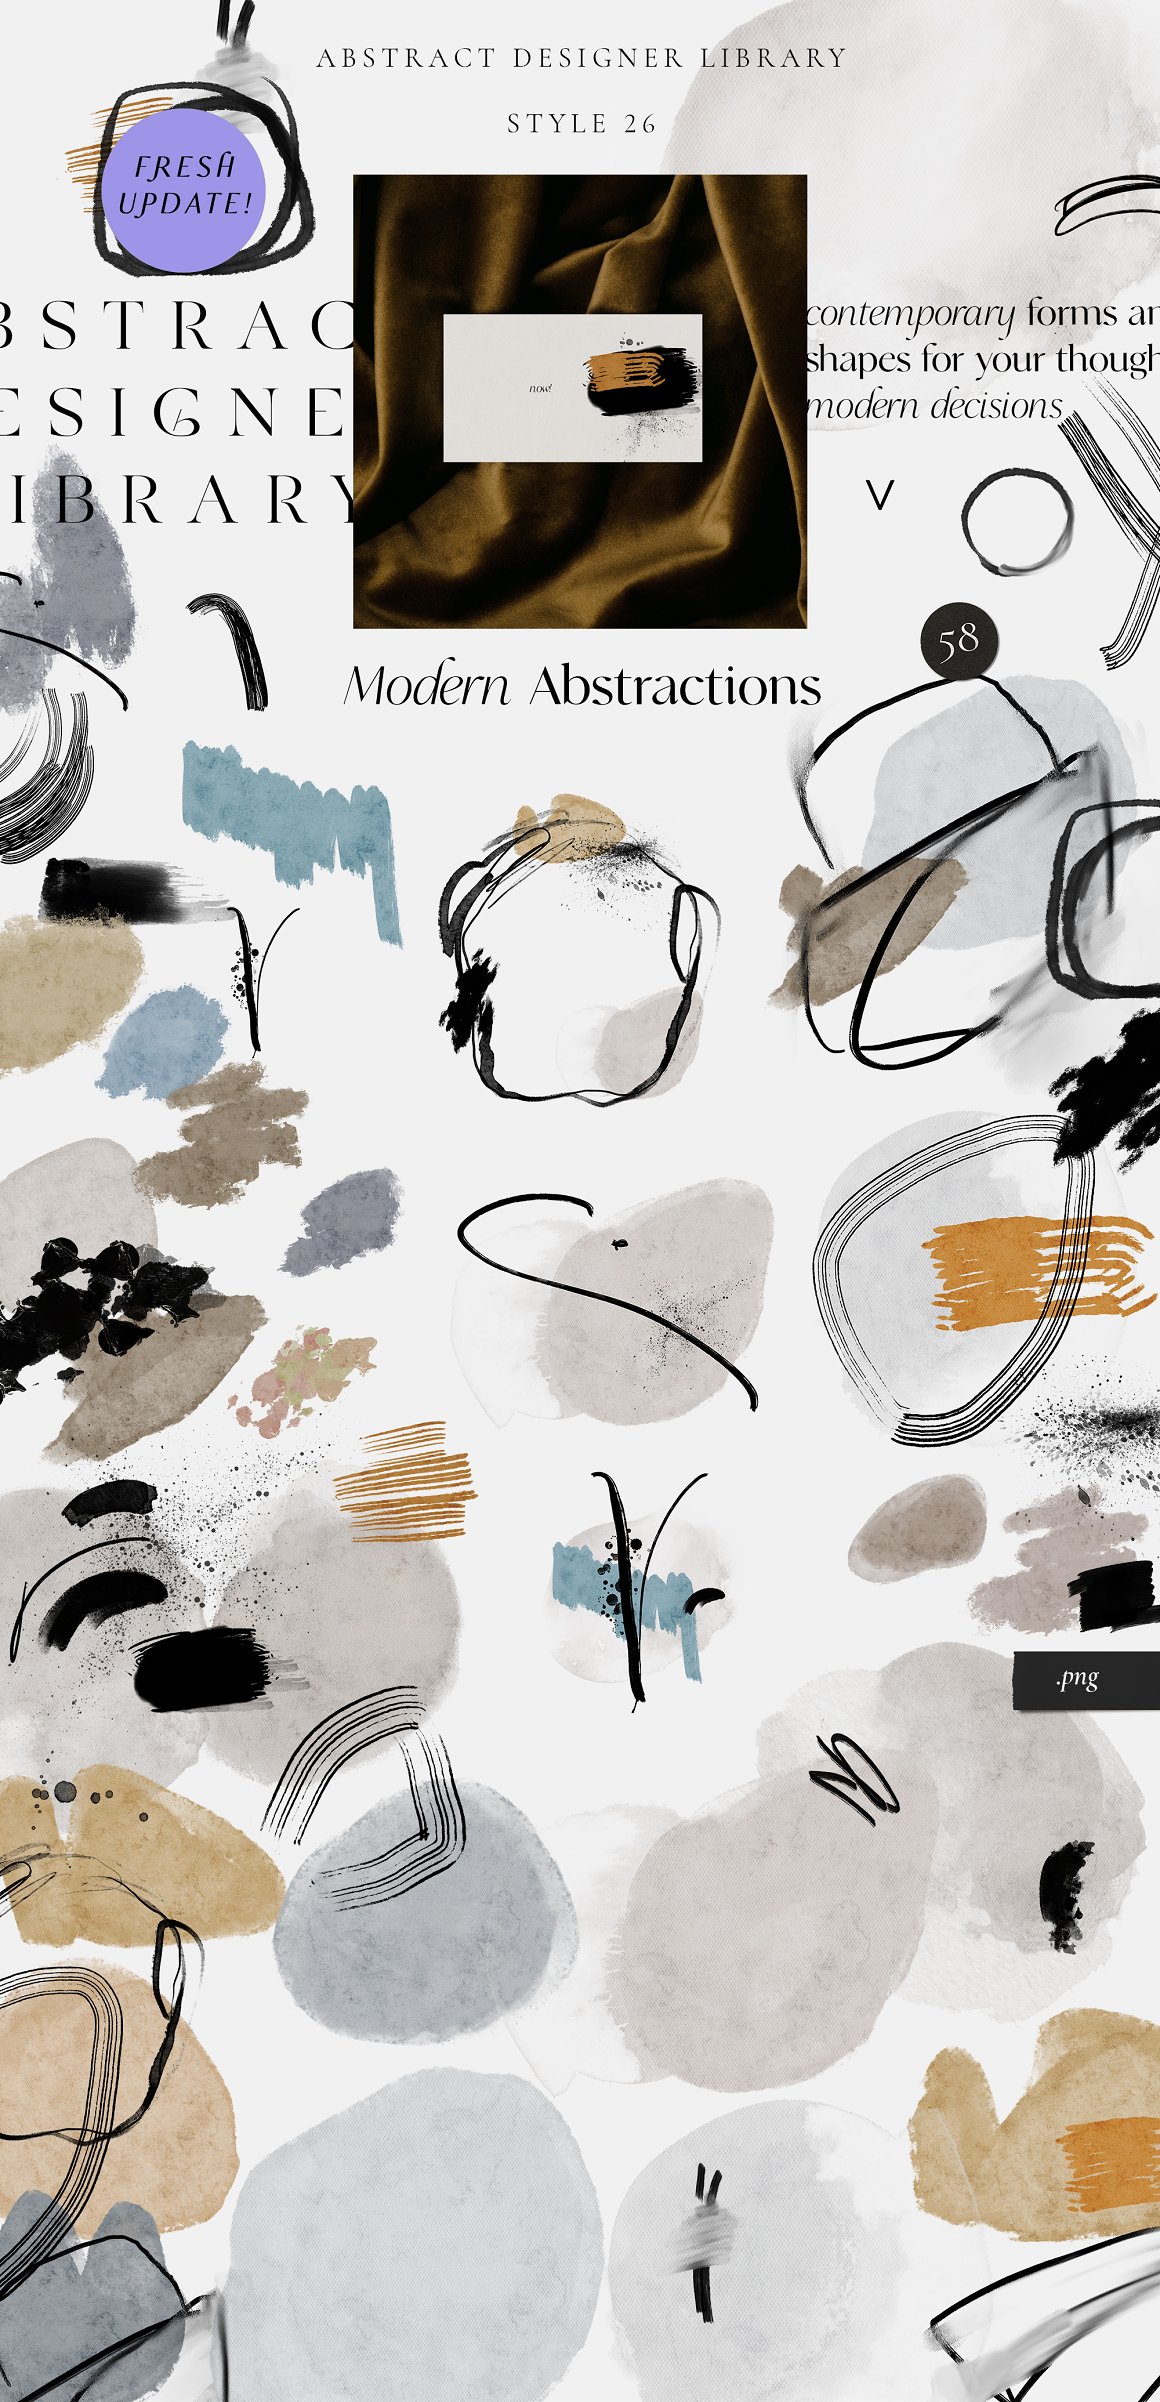 Bundle of different modern abstractions on a gray background.